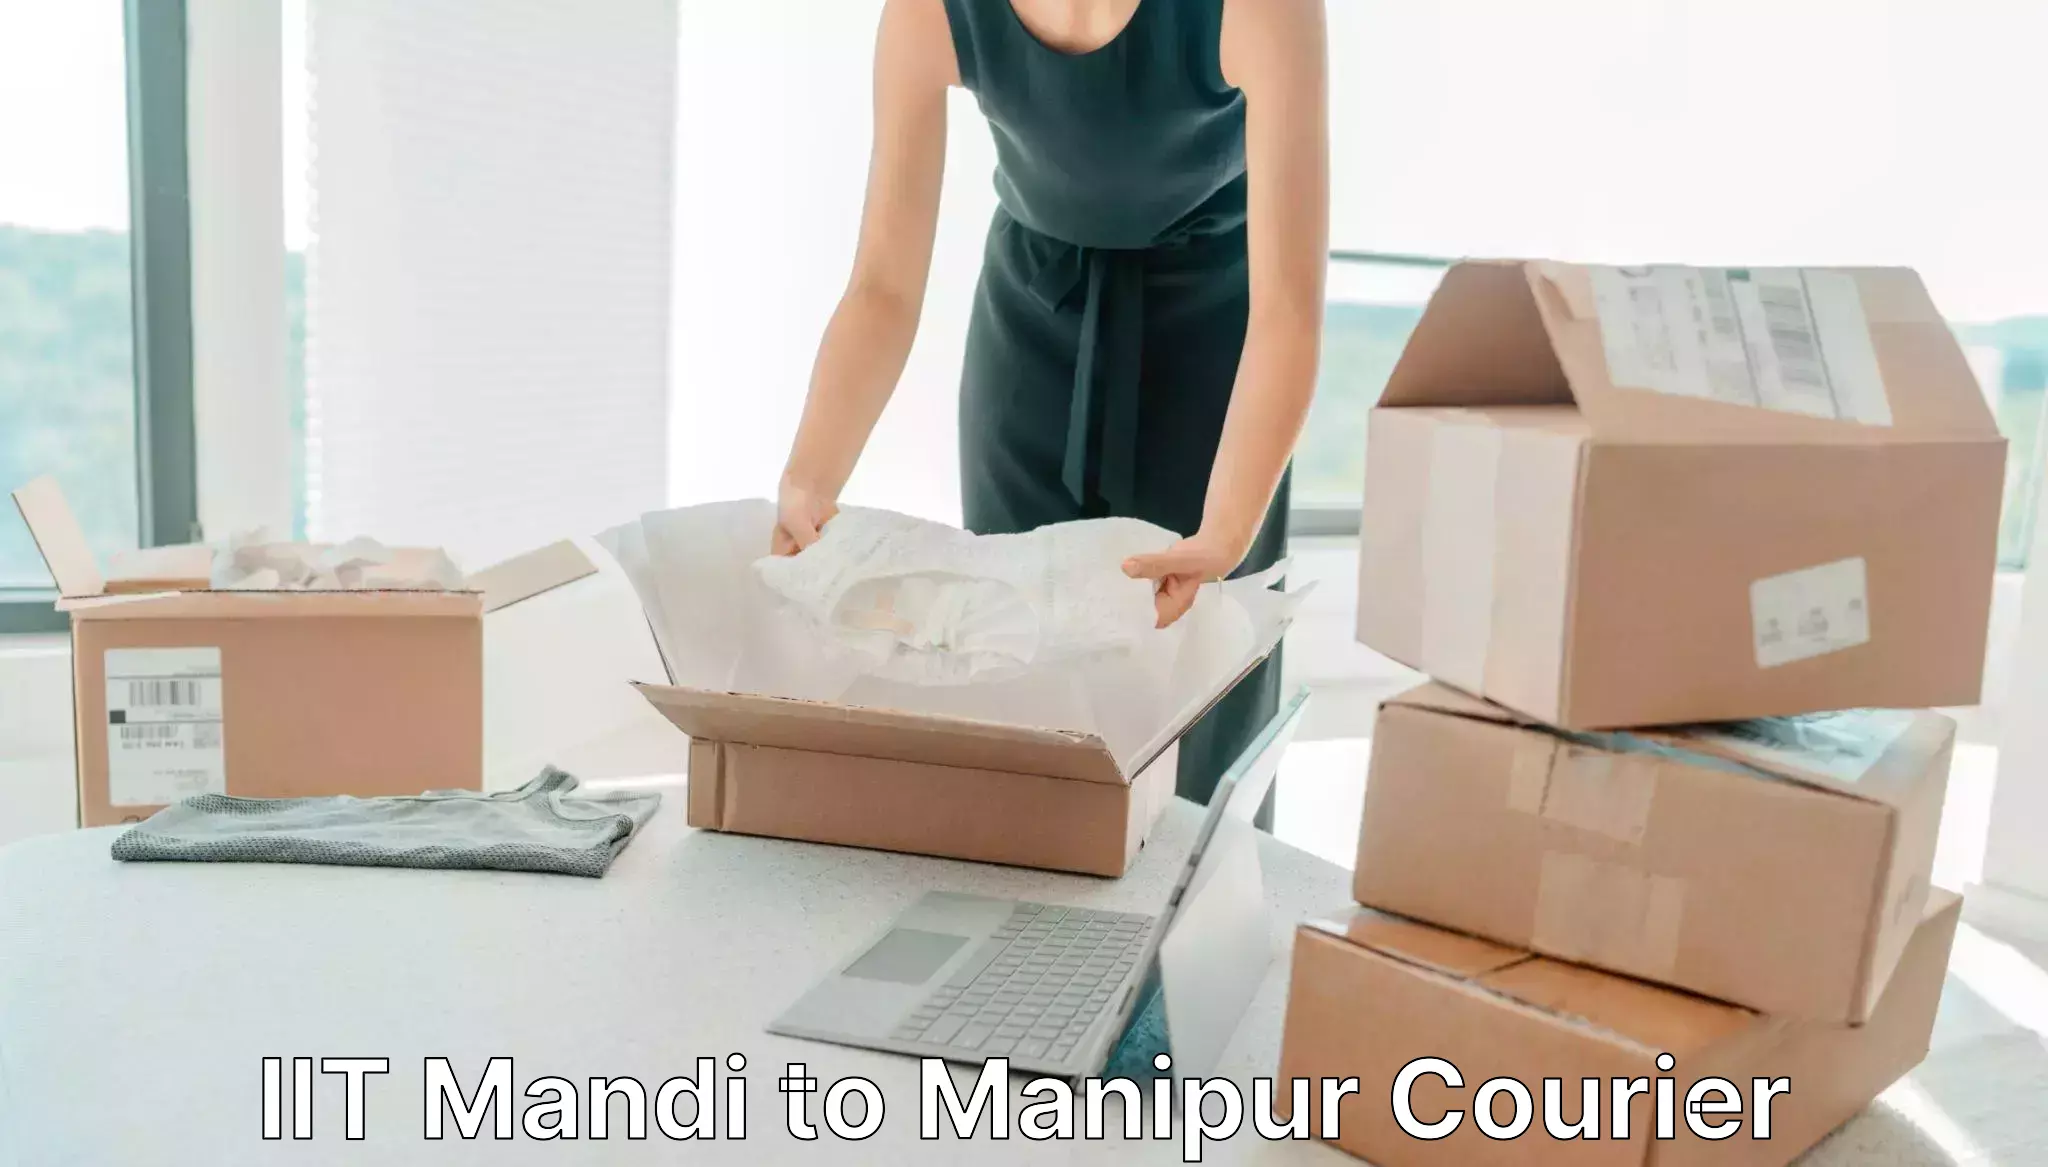 24-hour delivery options IIT Mandi to Imphal